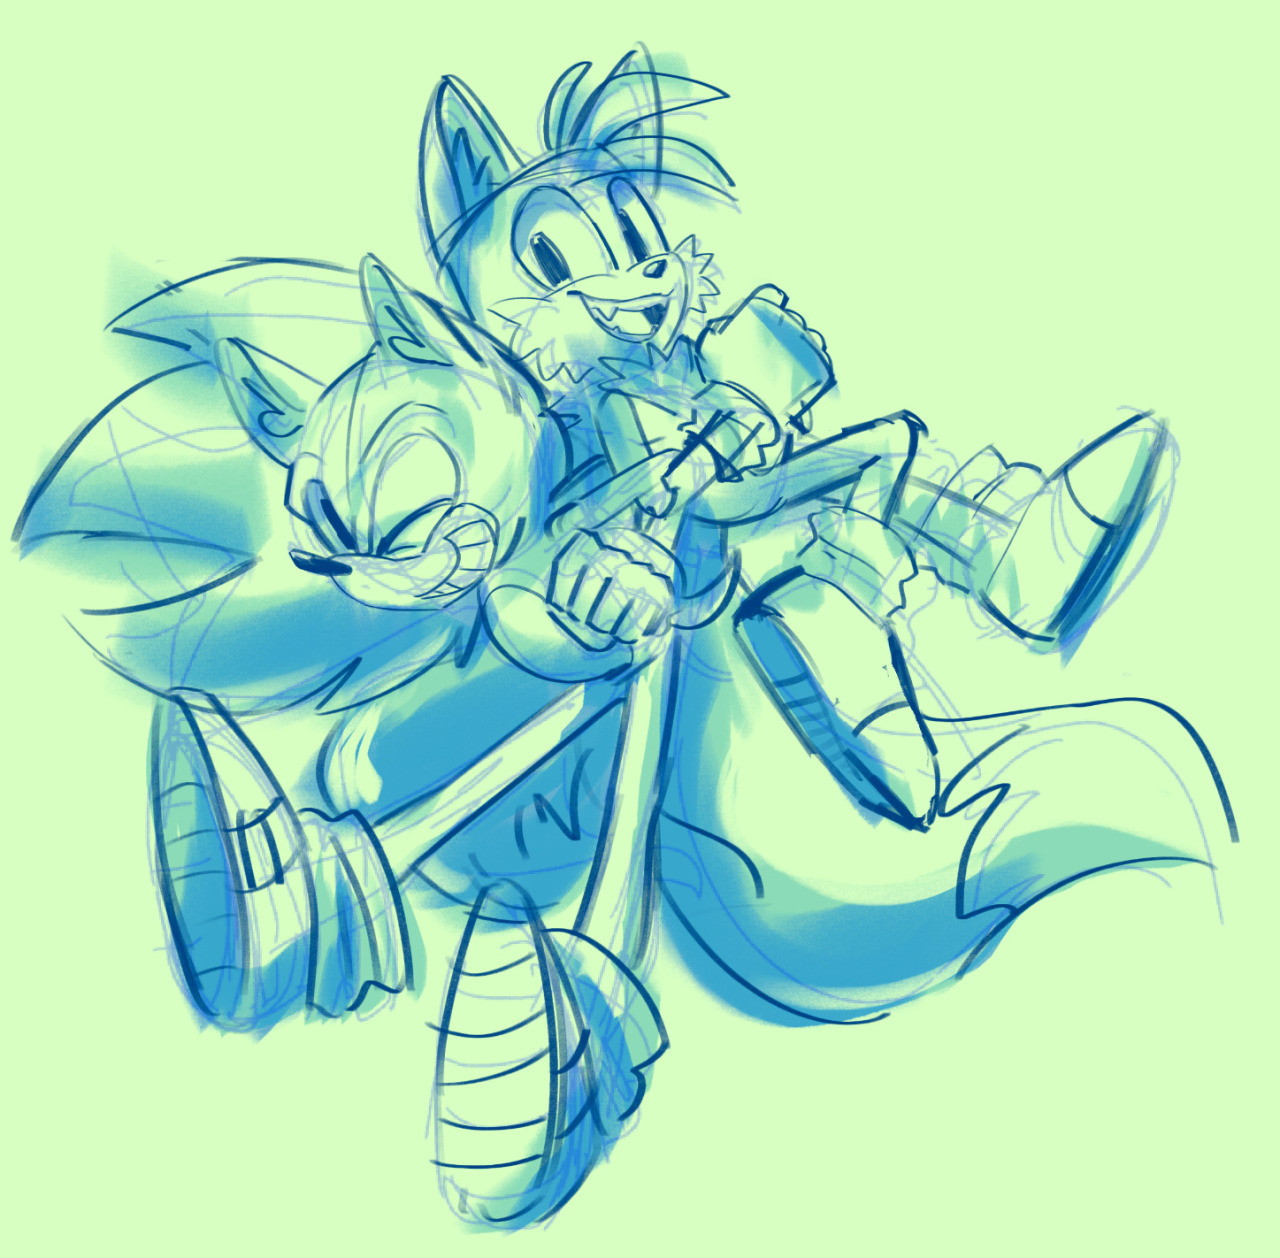 AndTails — Team Chaotix is so wholesome! You can just see how